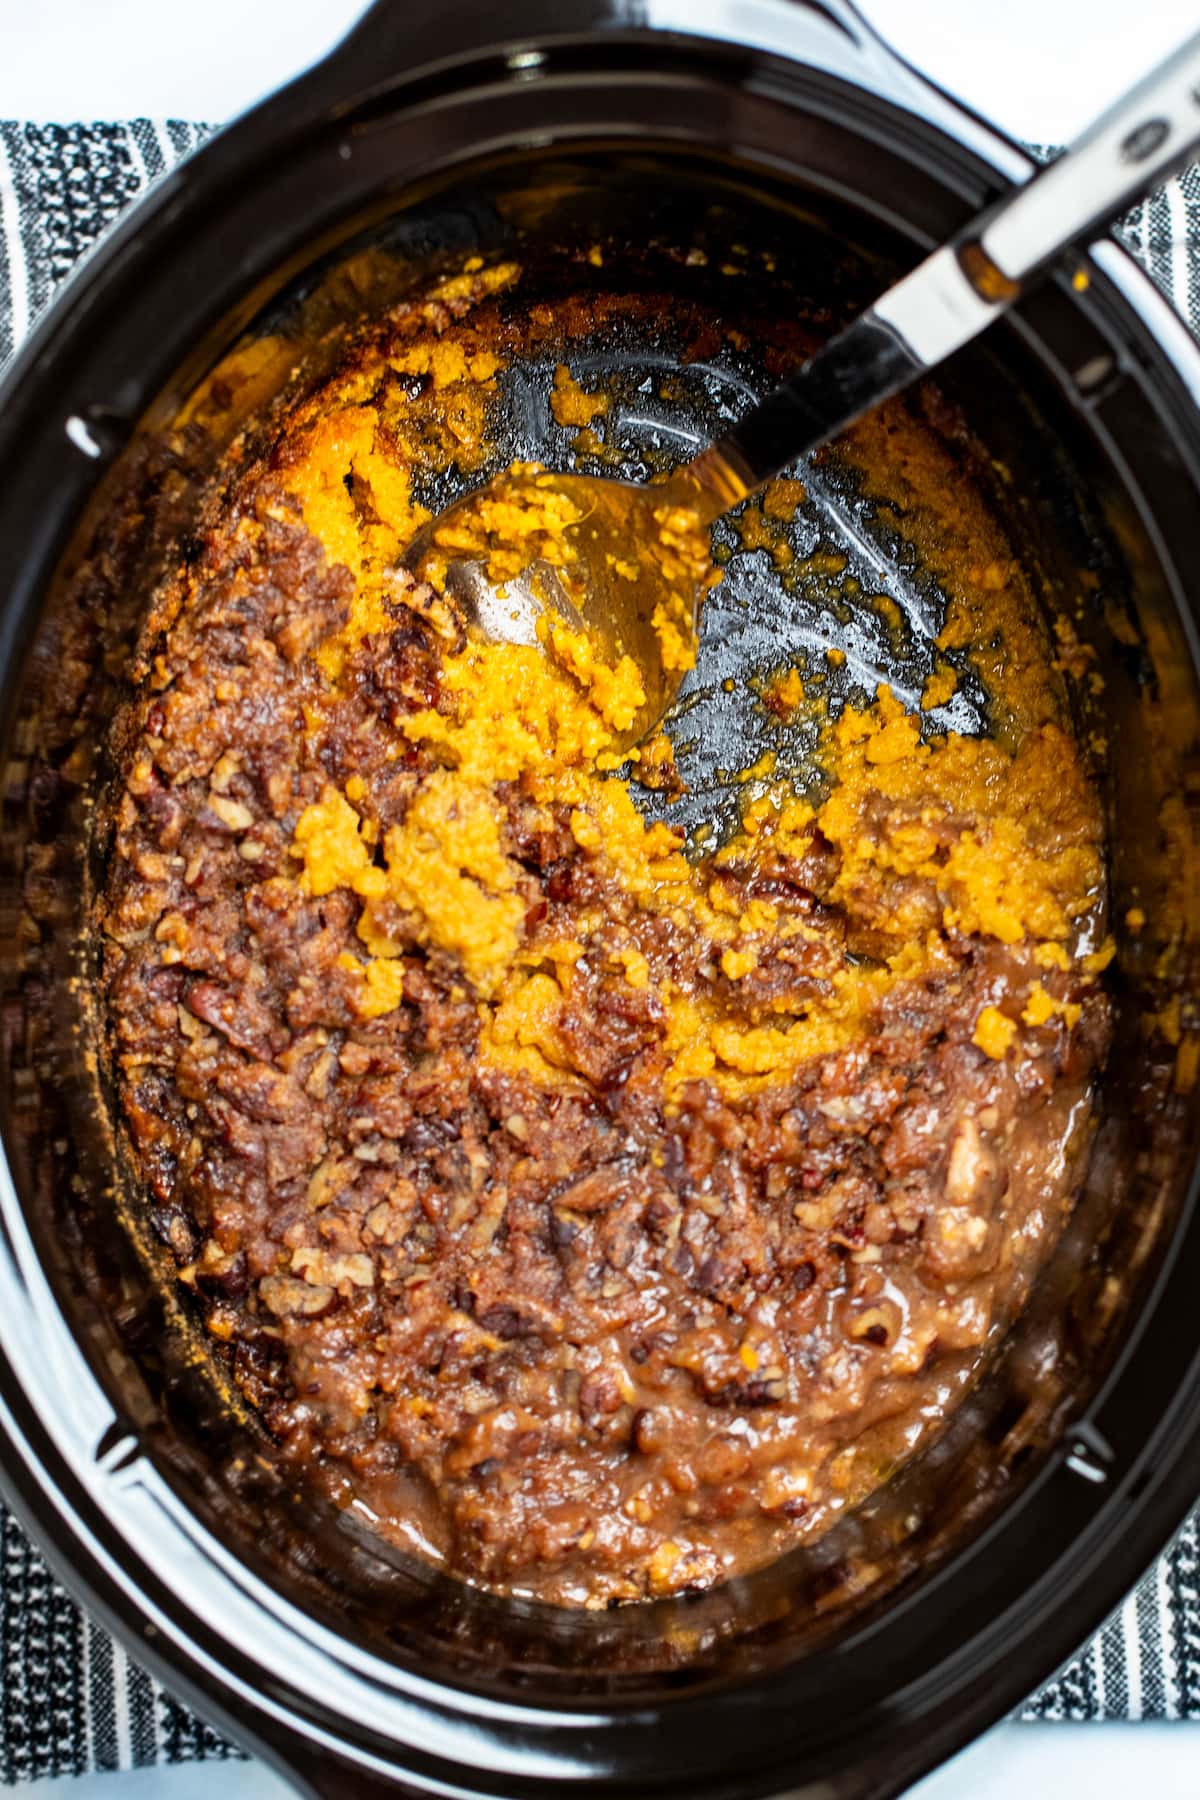 A crockpot sitting on top of a towel on the table, with a spoon sitting in the pot having already served some of the sweet potato casserole.